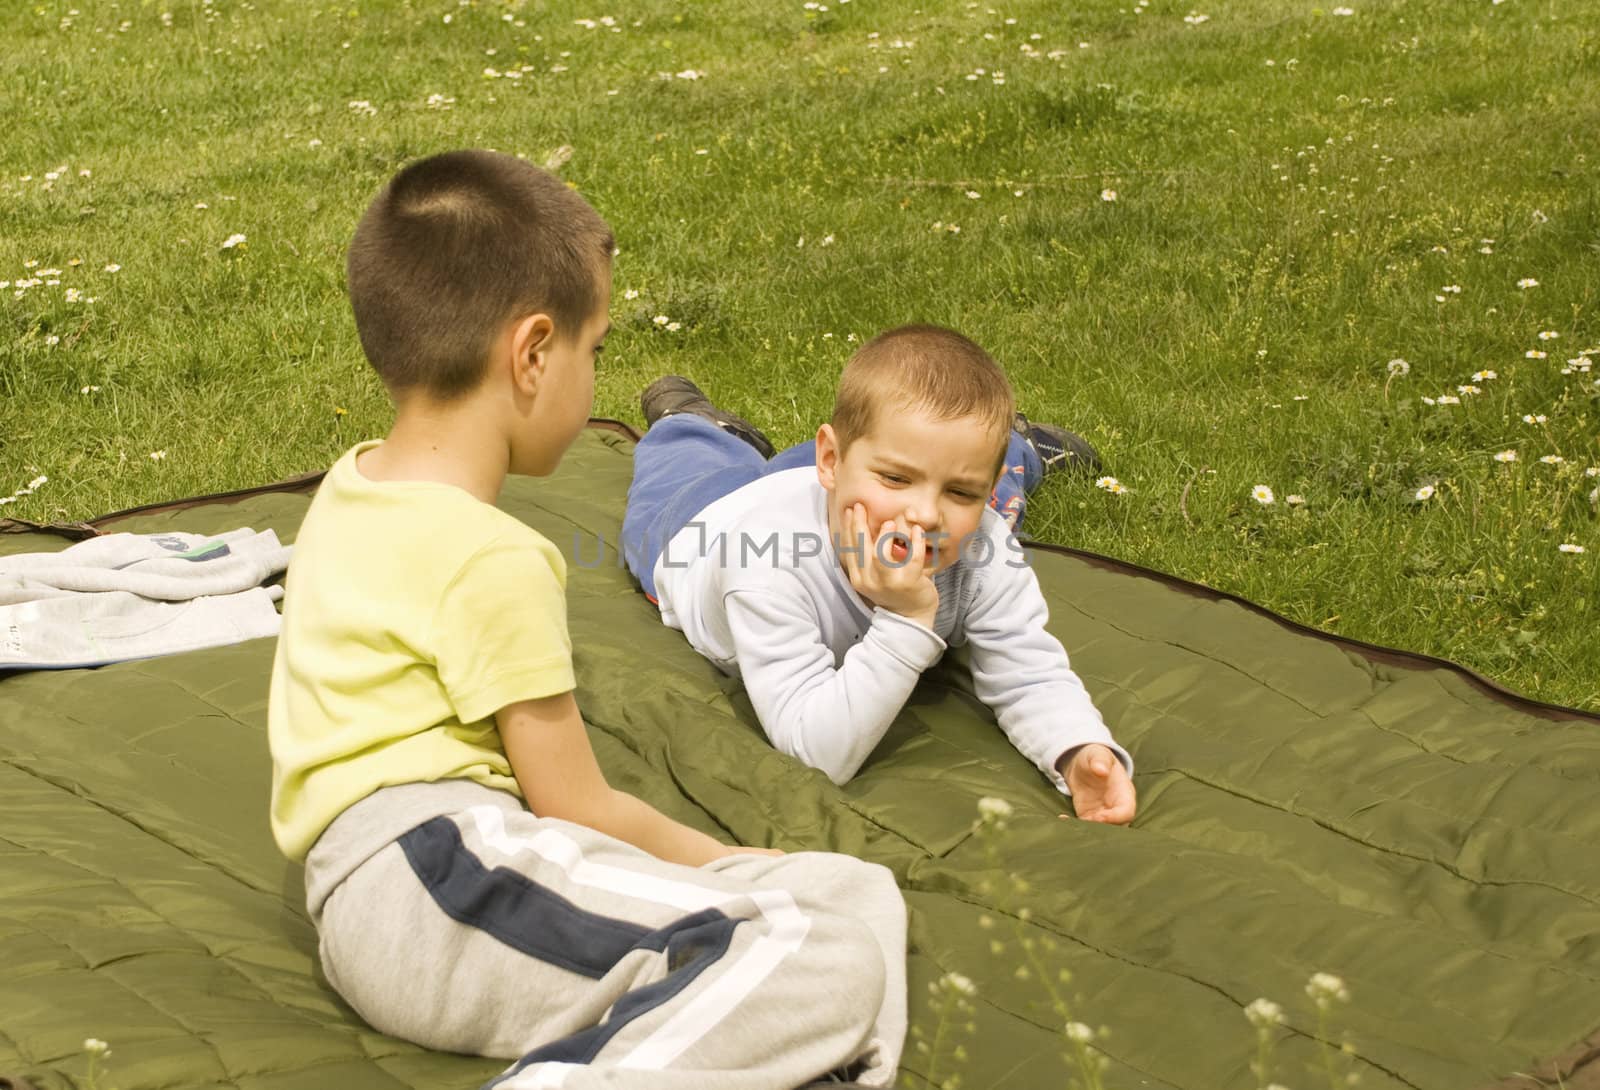 two boys on a blanket enjoying the sunny day